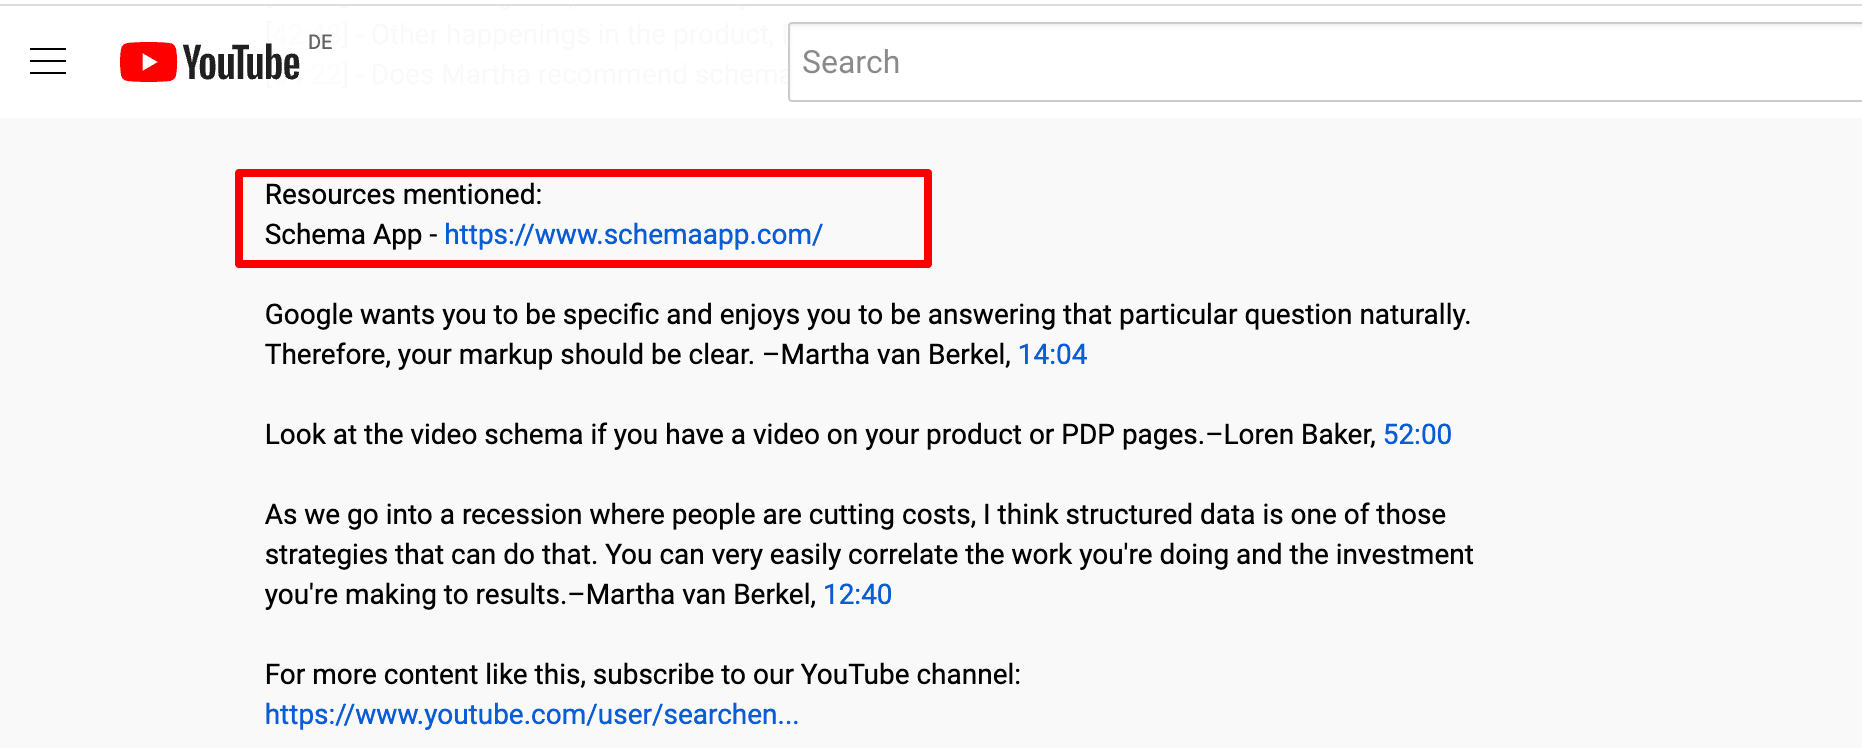 Mentioning the website on video-sharing platforms like YouTube